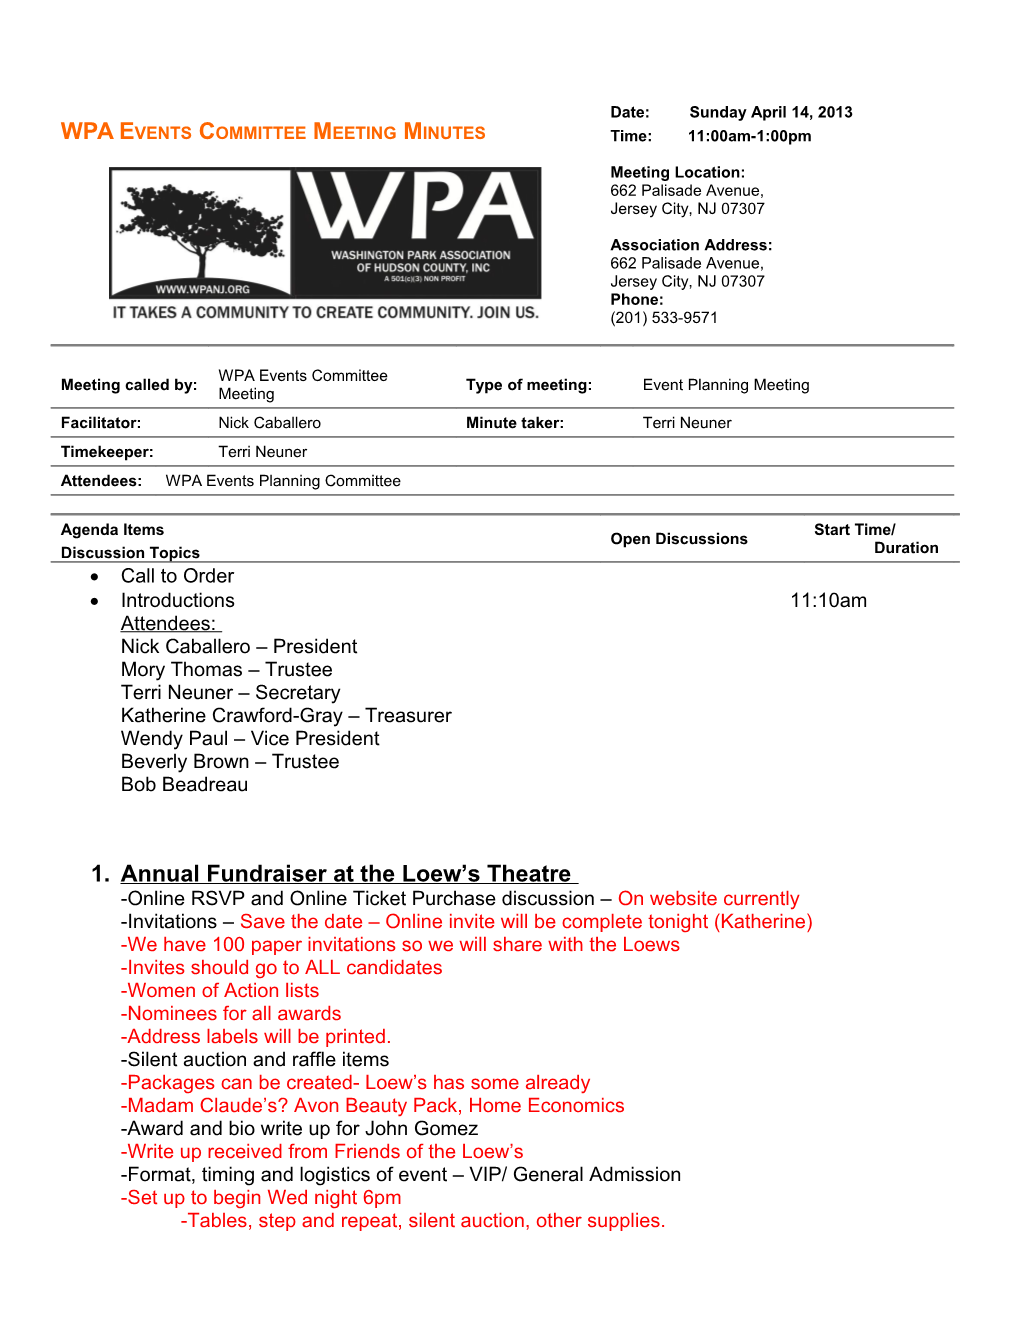 WPA Events Committee Meeting Minutes